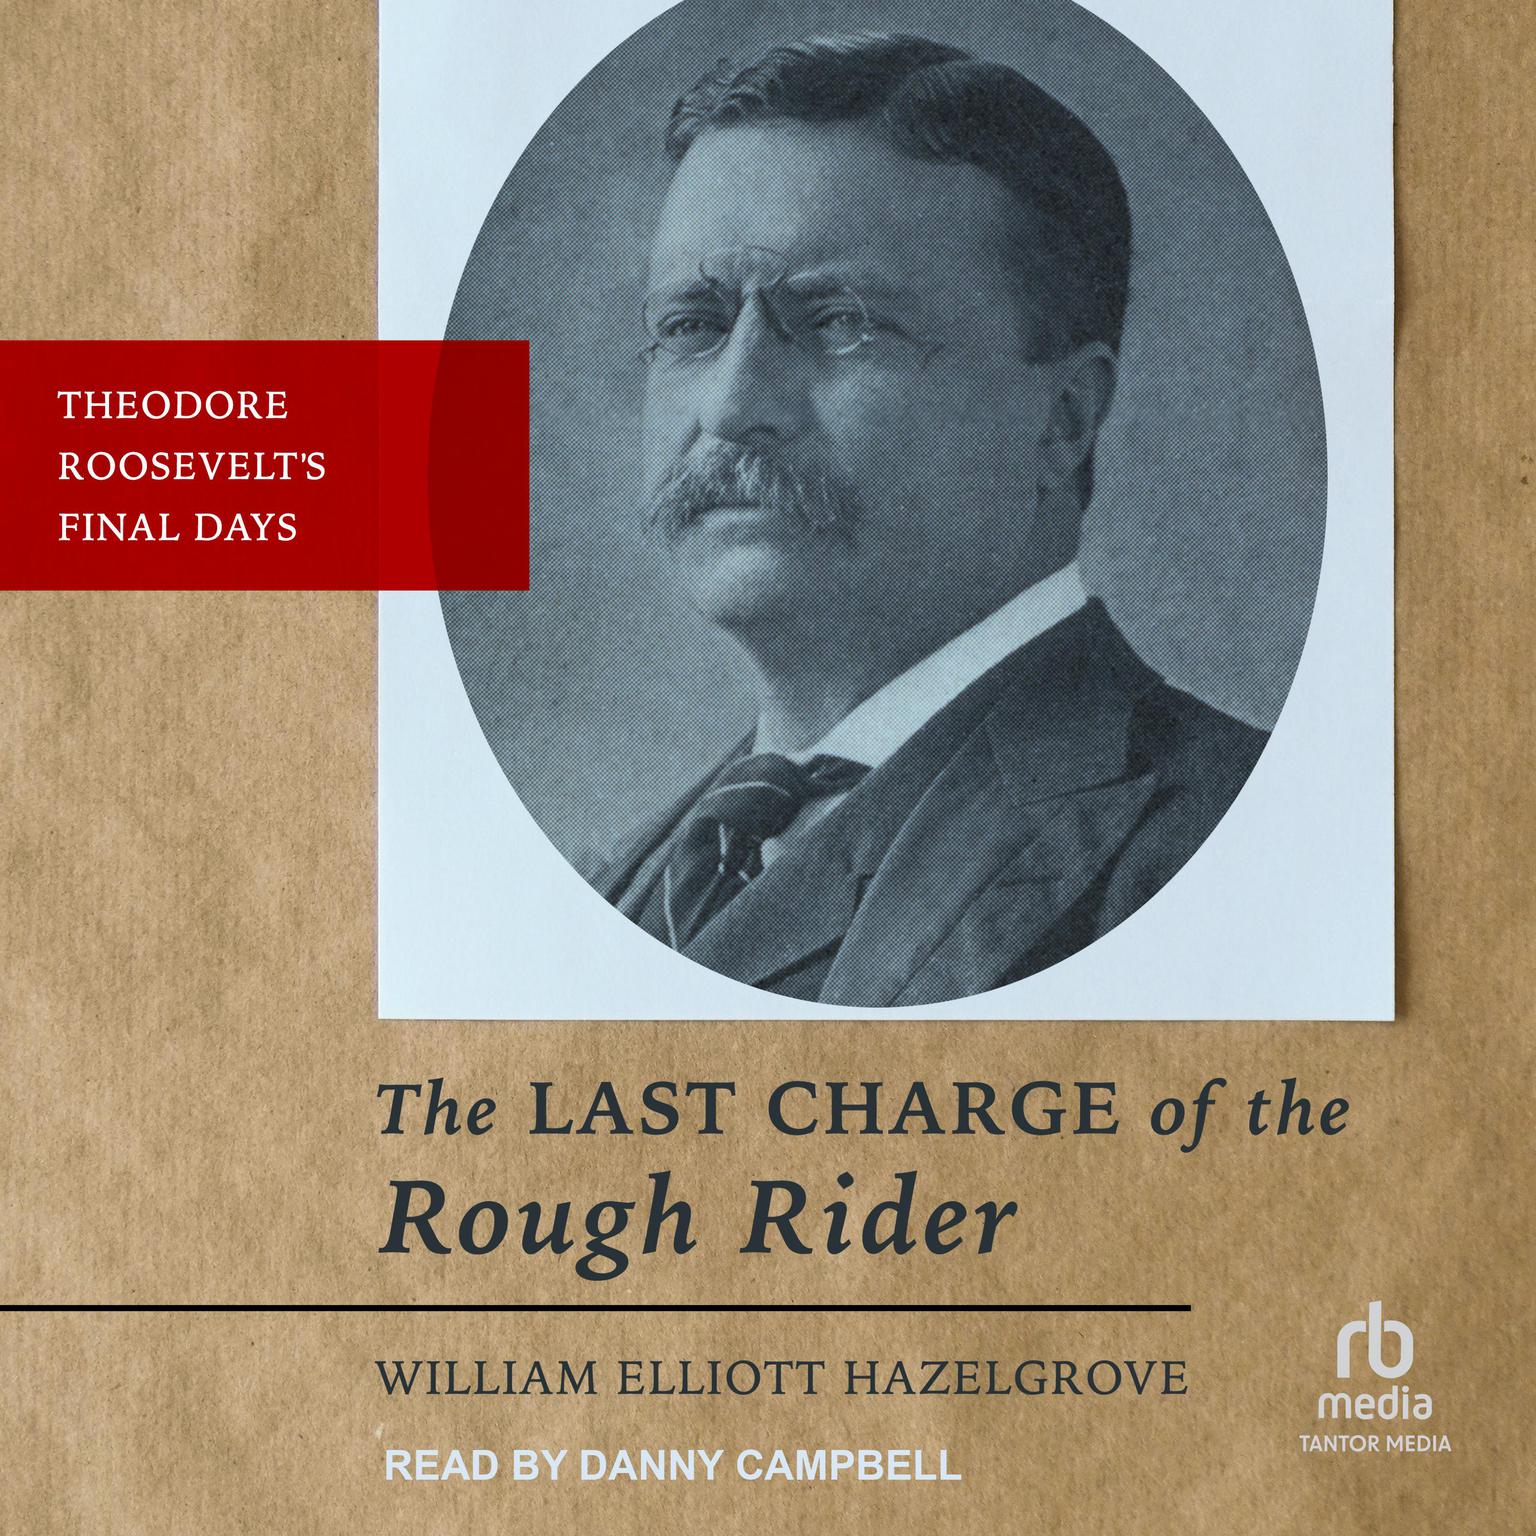 The Last Charge of the Rough Rider: Theodore Roosevelts Final Days Audiobook, by William Elliott Hazelgrove